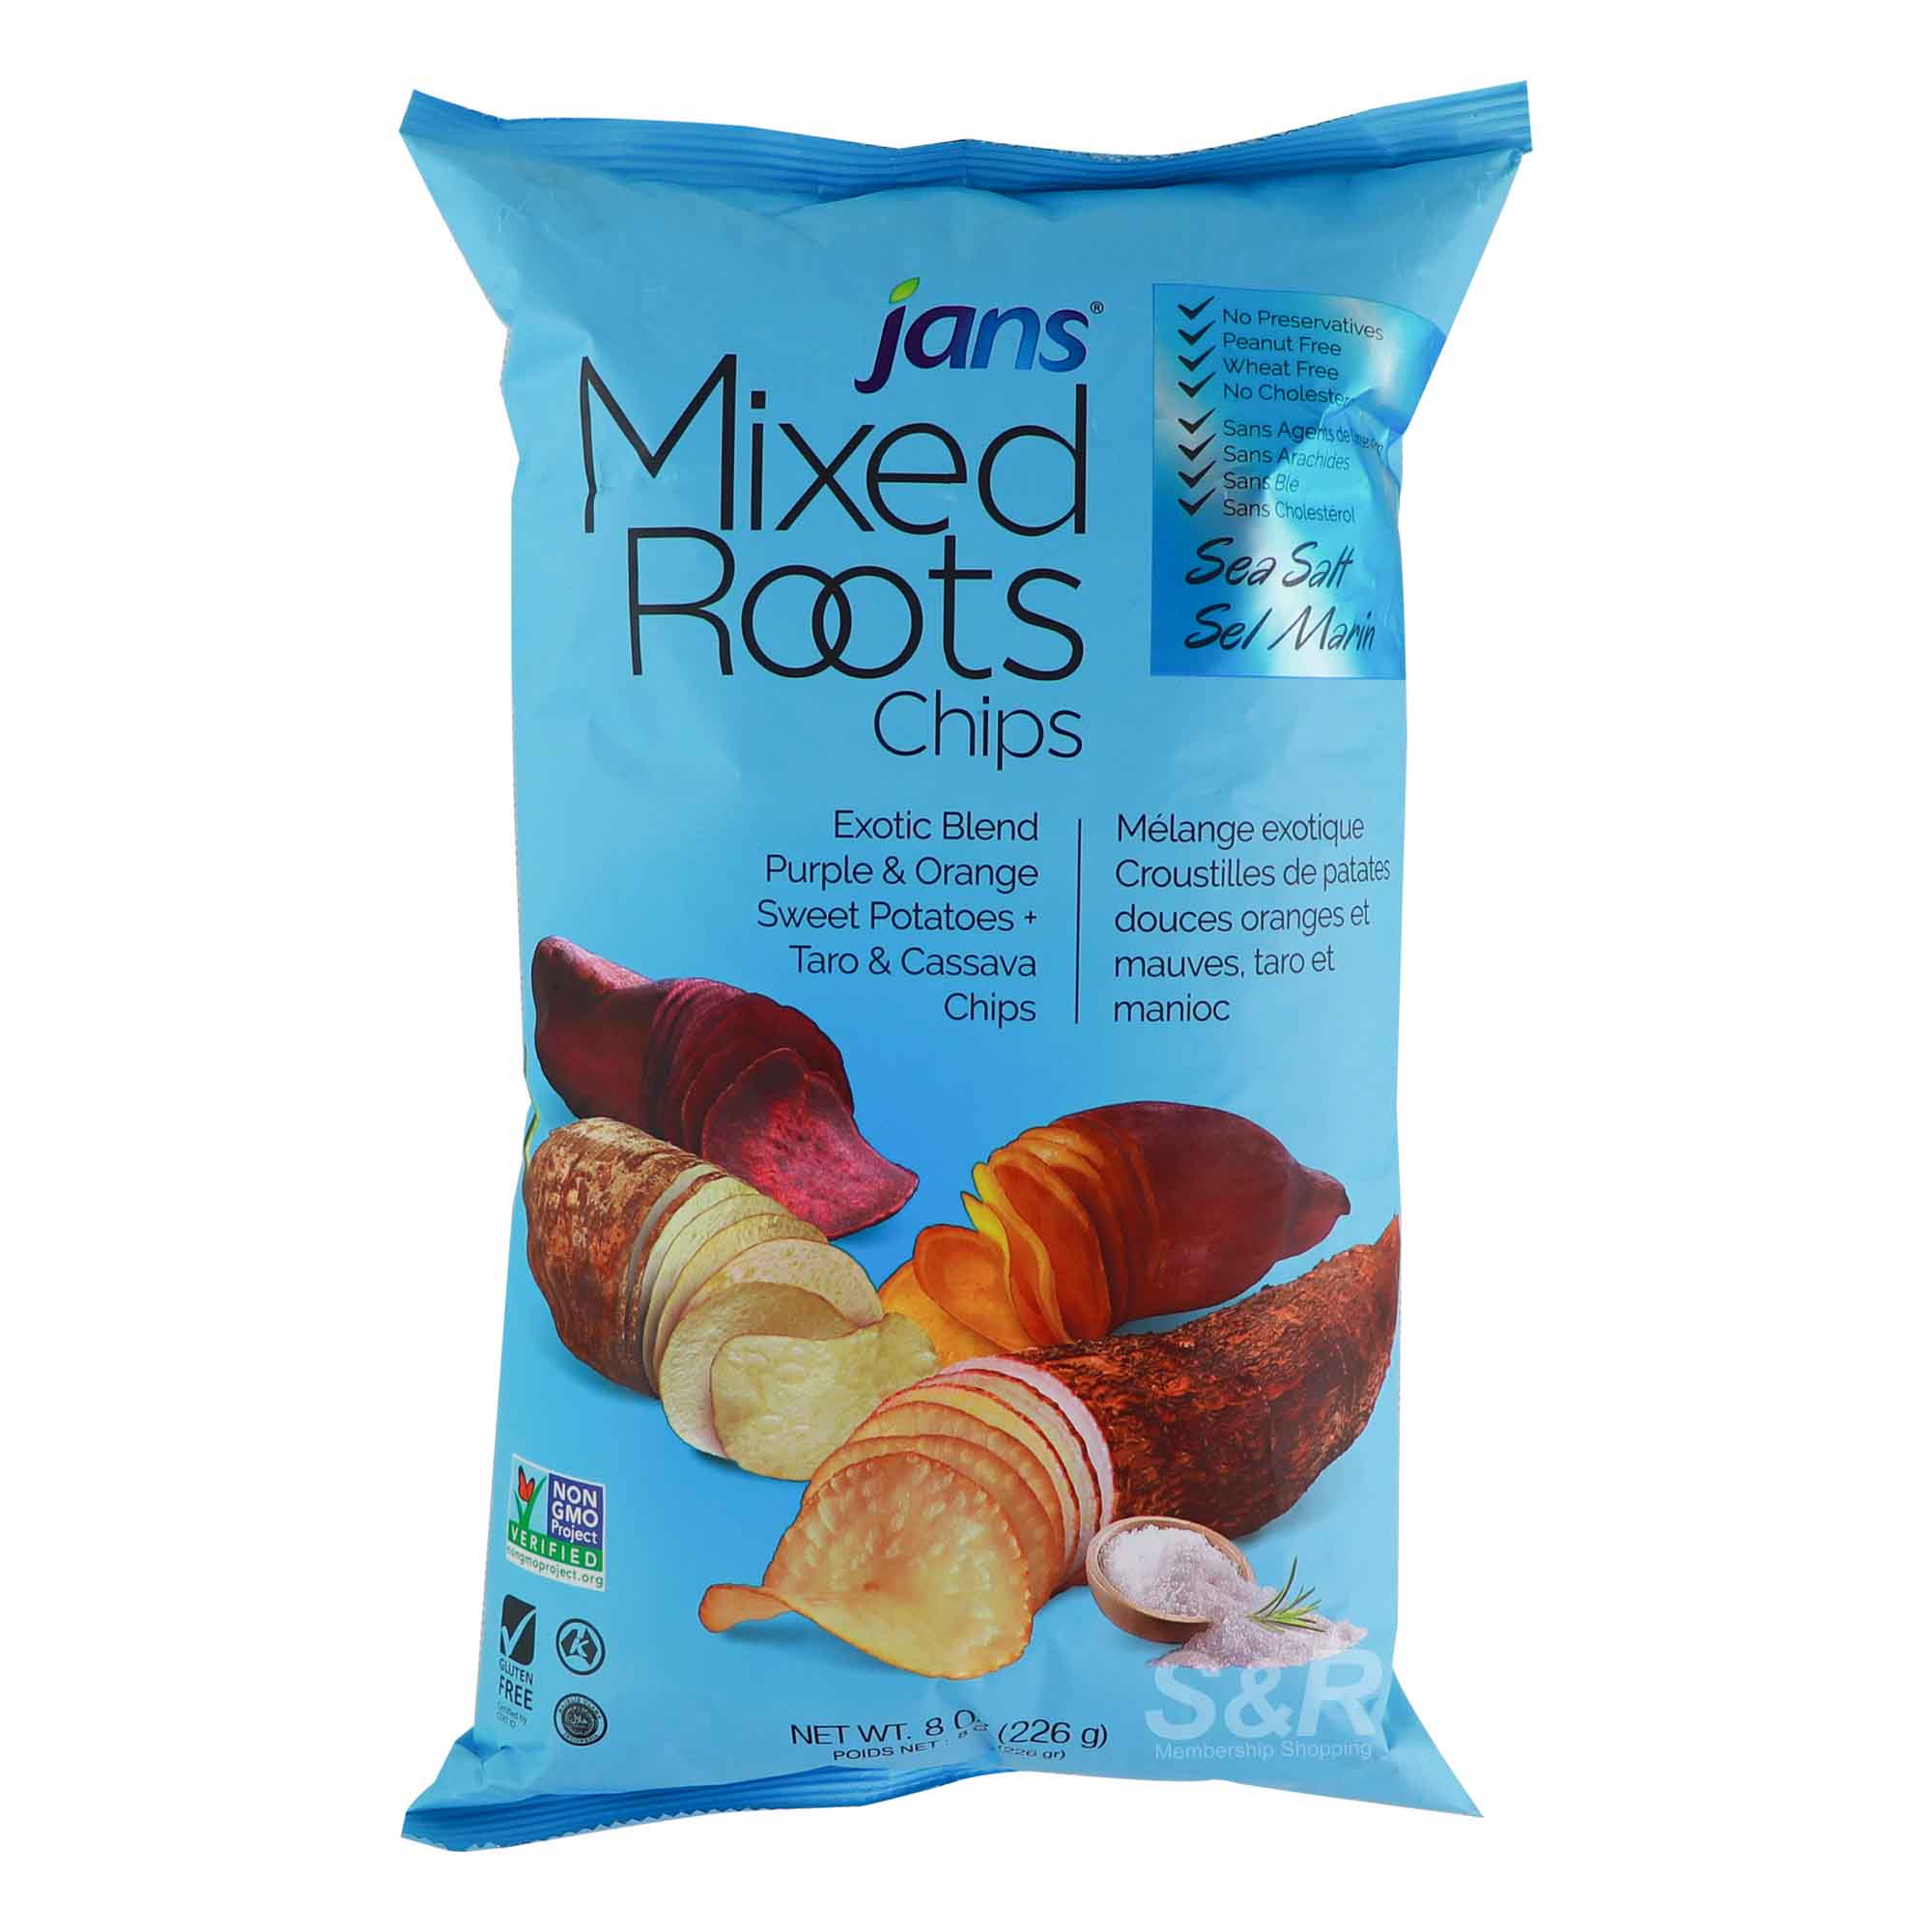 Jans Mixed Roots Chips 226g